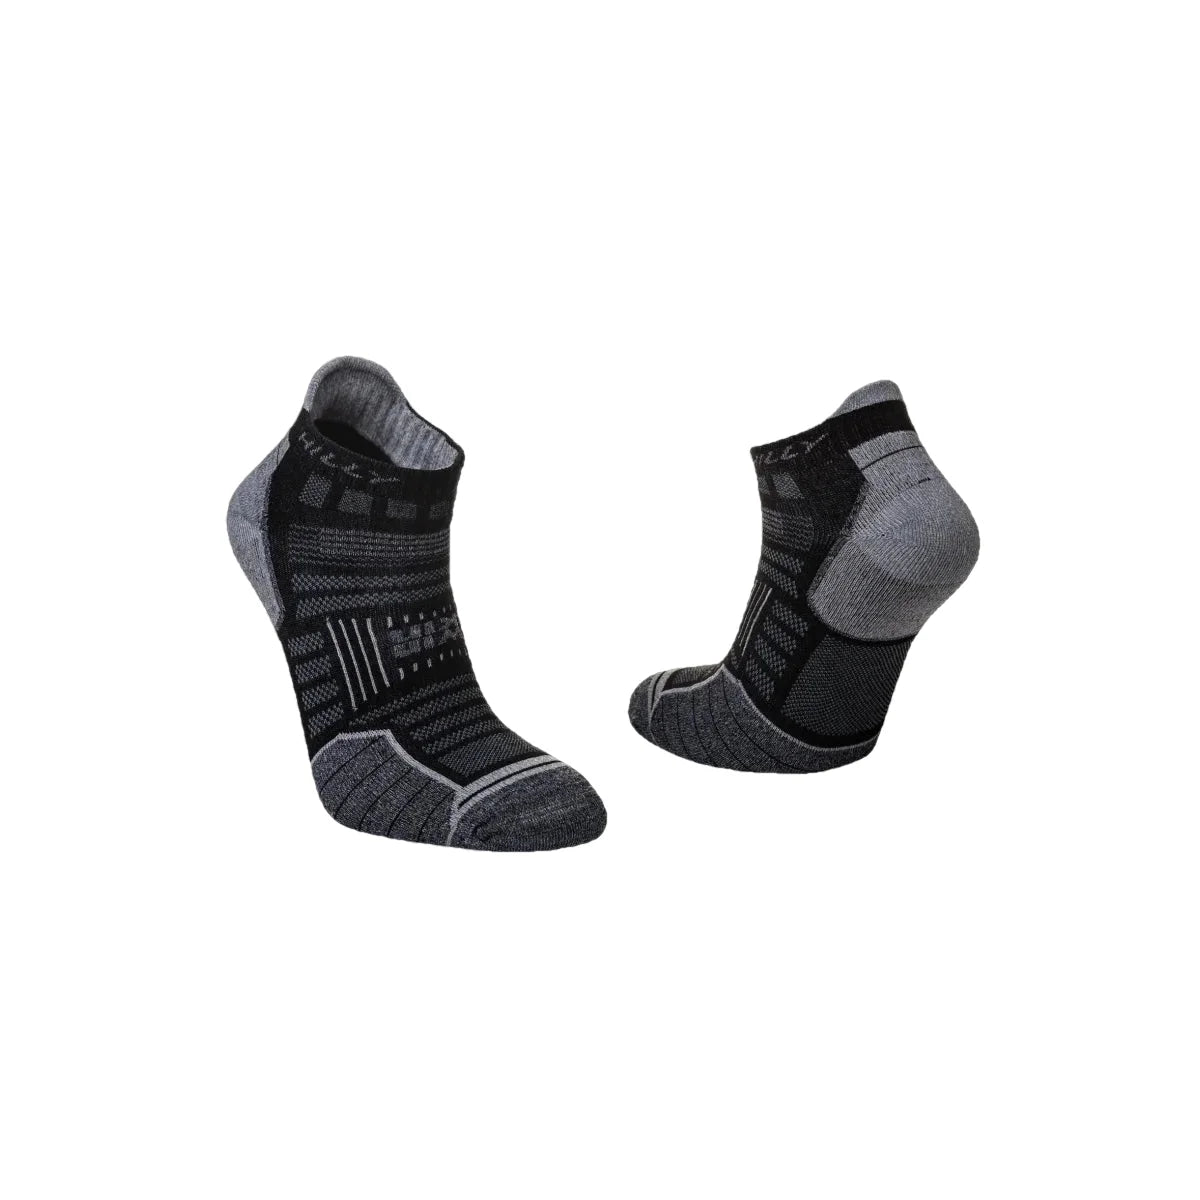 Unisex Hilly Twin Skin Socklets